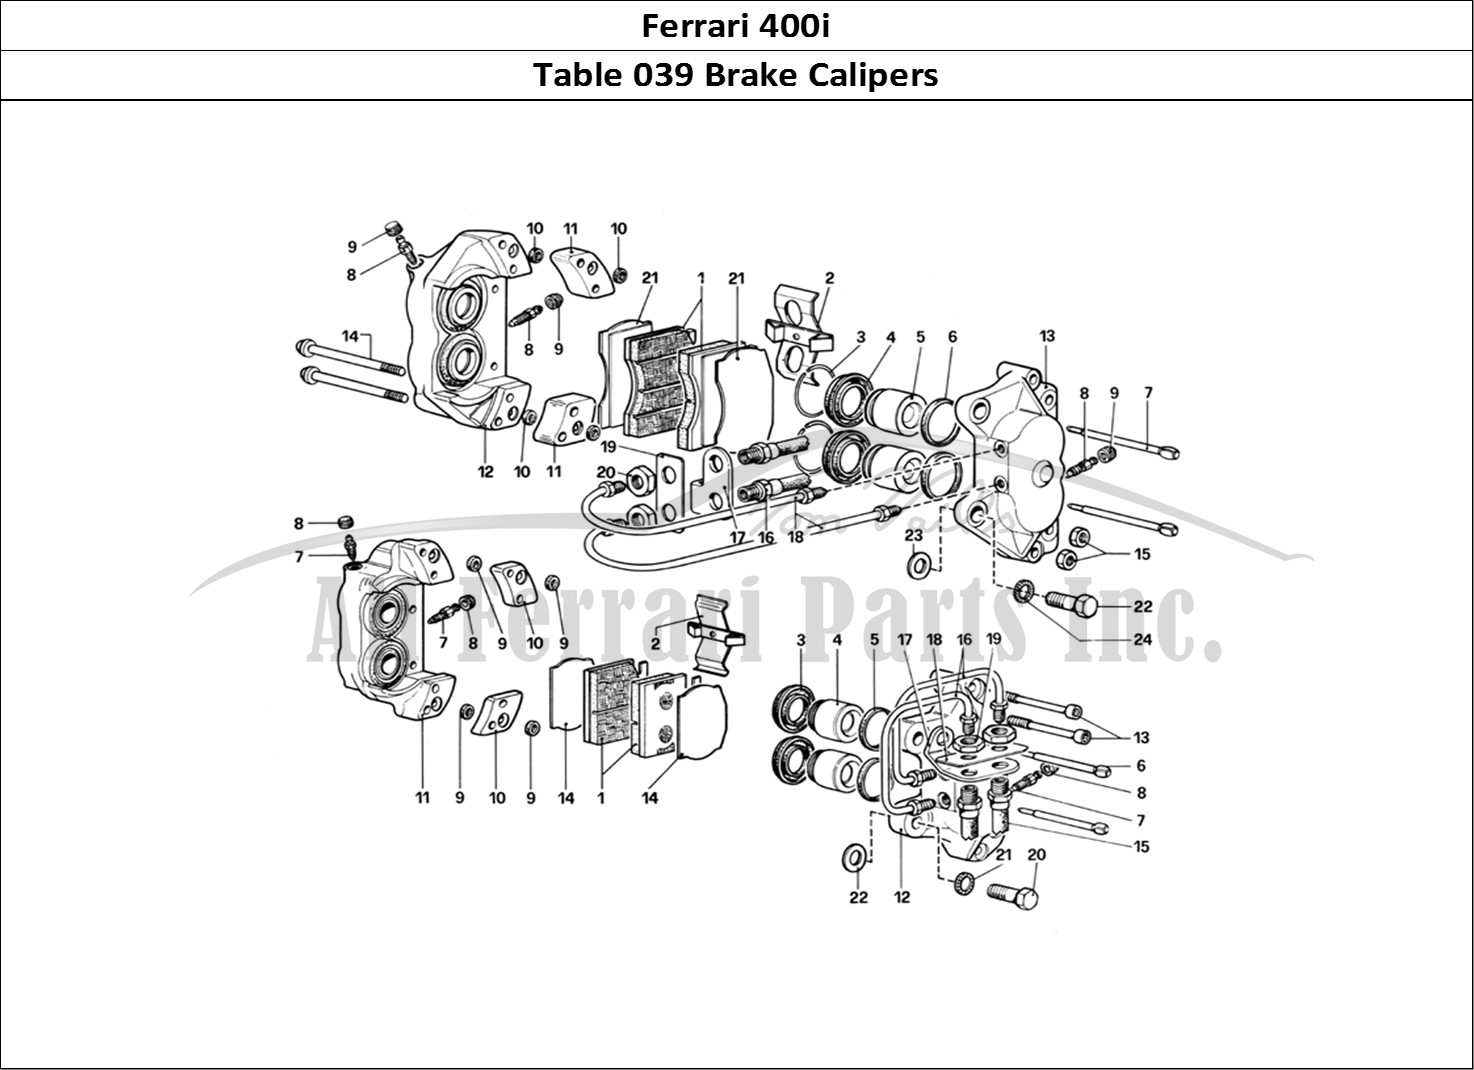 Ferrari Parts Ferrari 400i (1983 Mechanical) Page 039 Calipers for Front and Re